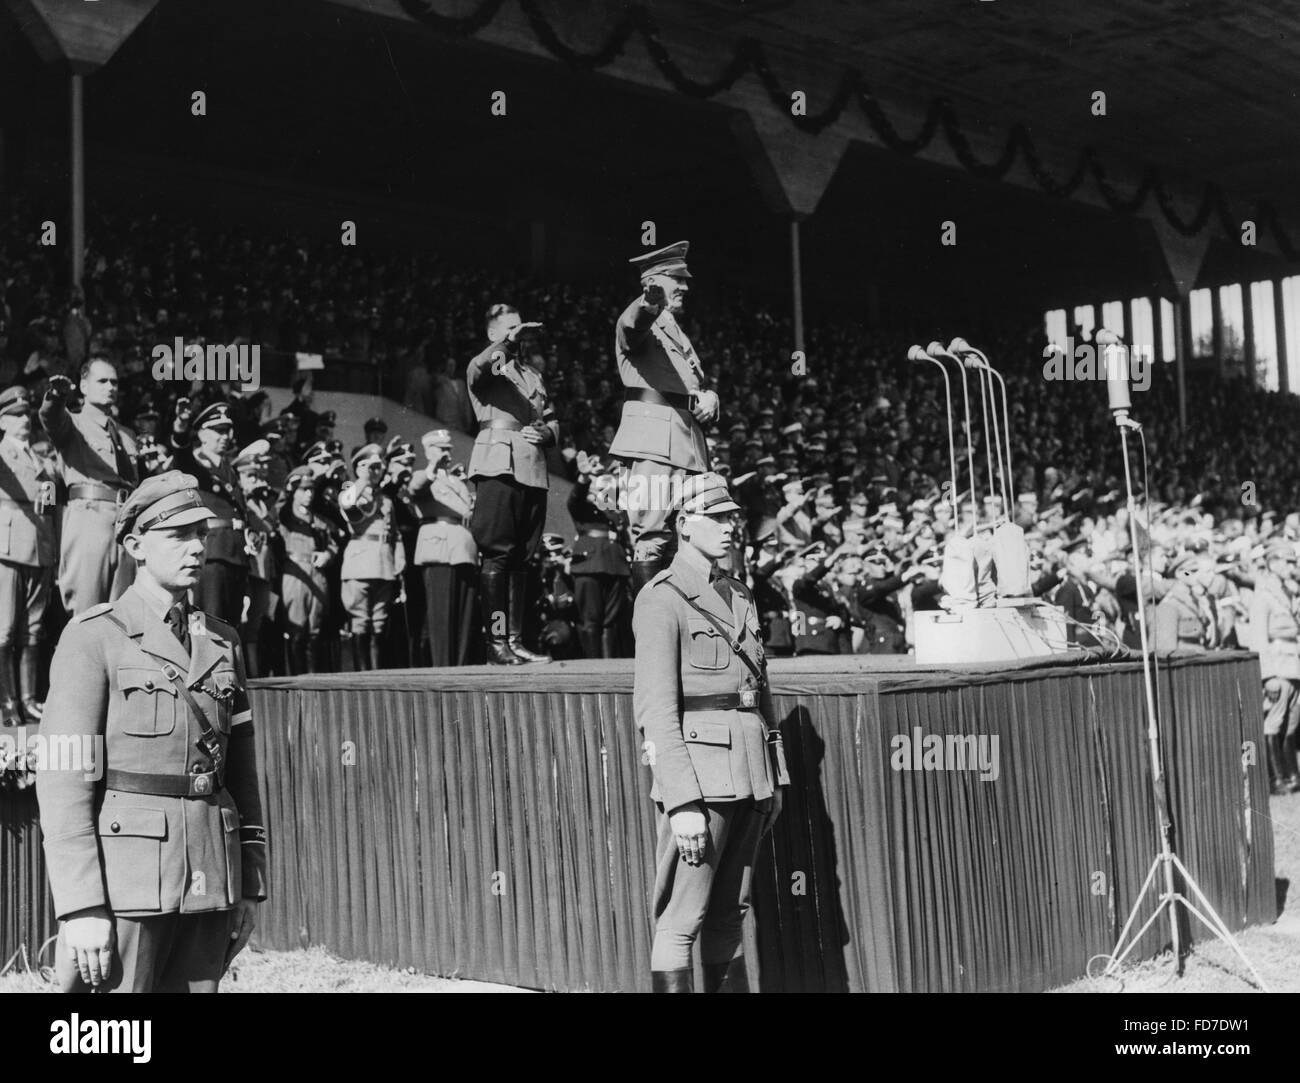 Adolf Hitler, von Schirach, Hess, Rust on the Day of the Hitler Youth at the Nazi Party Rally, 1936 Stock Photo